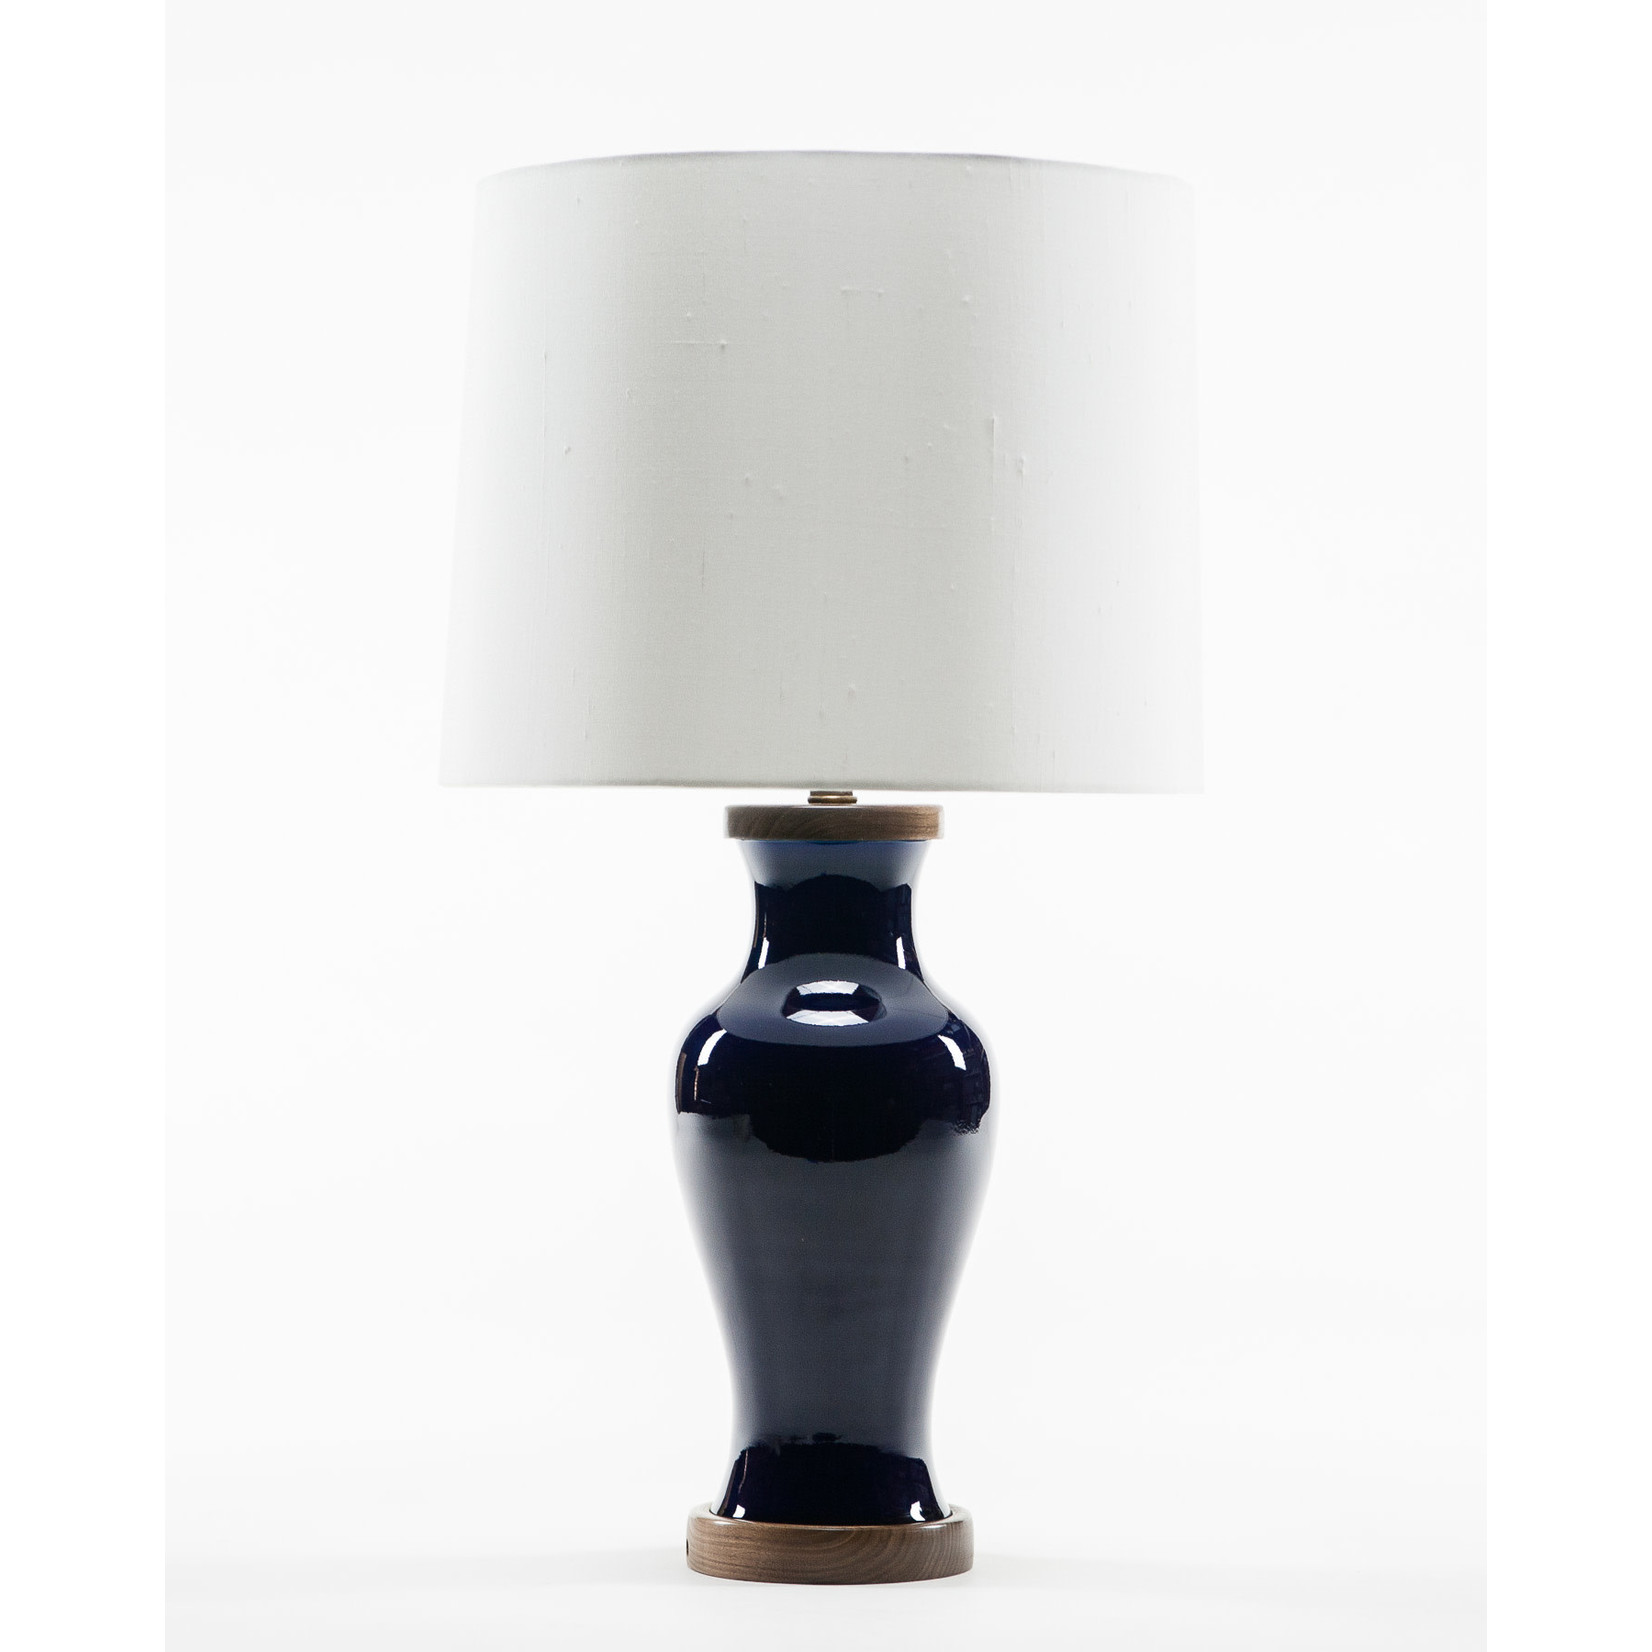 Lawrence & Scott Gabrielle Baluster Porcelain Lamp in Cobalt with Rosewood Base